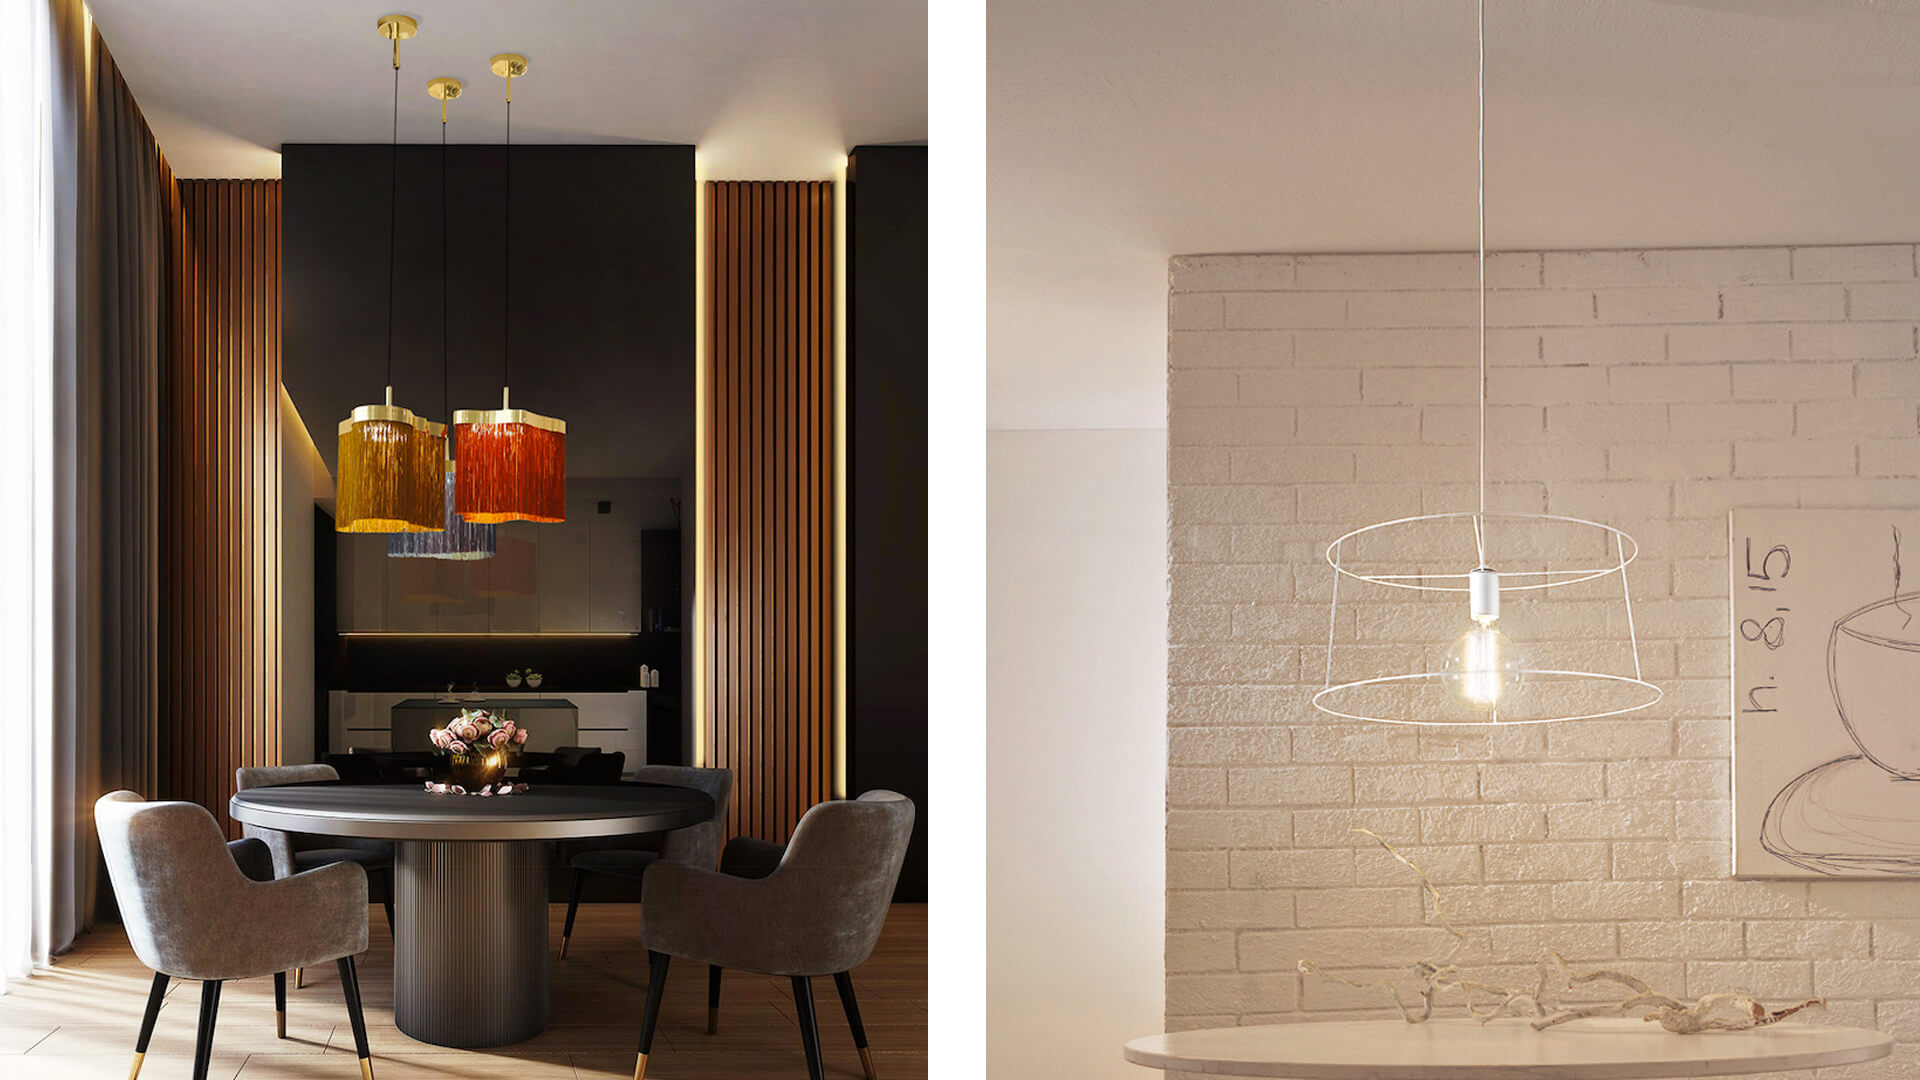 Blog IDW - How to choose the right lighting for every room